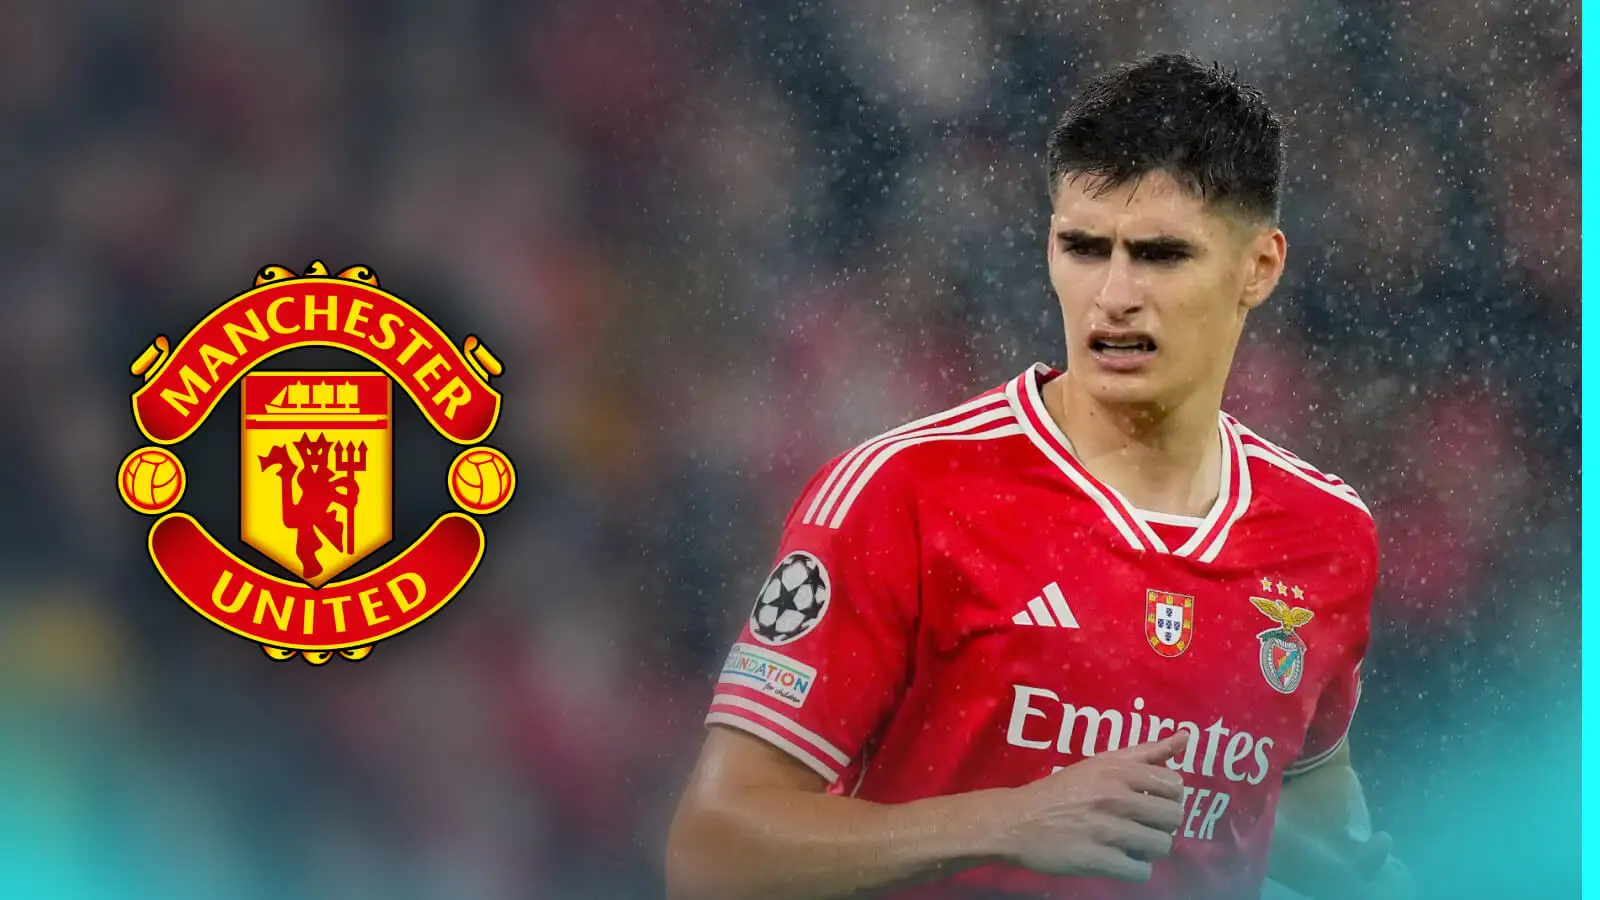 Man Utd ‘put up’ £69m to beat Liverpool, Chelsea to defender as Romano reveals Maguire stance